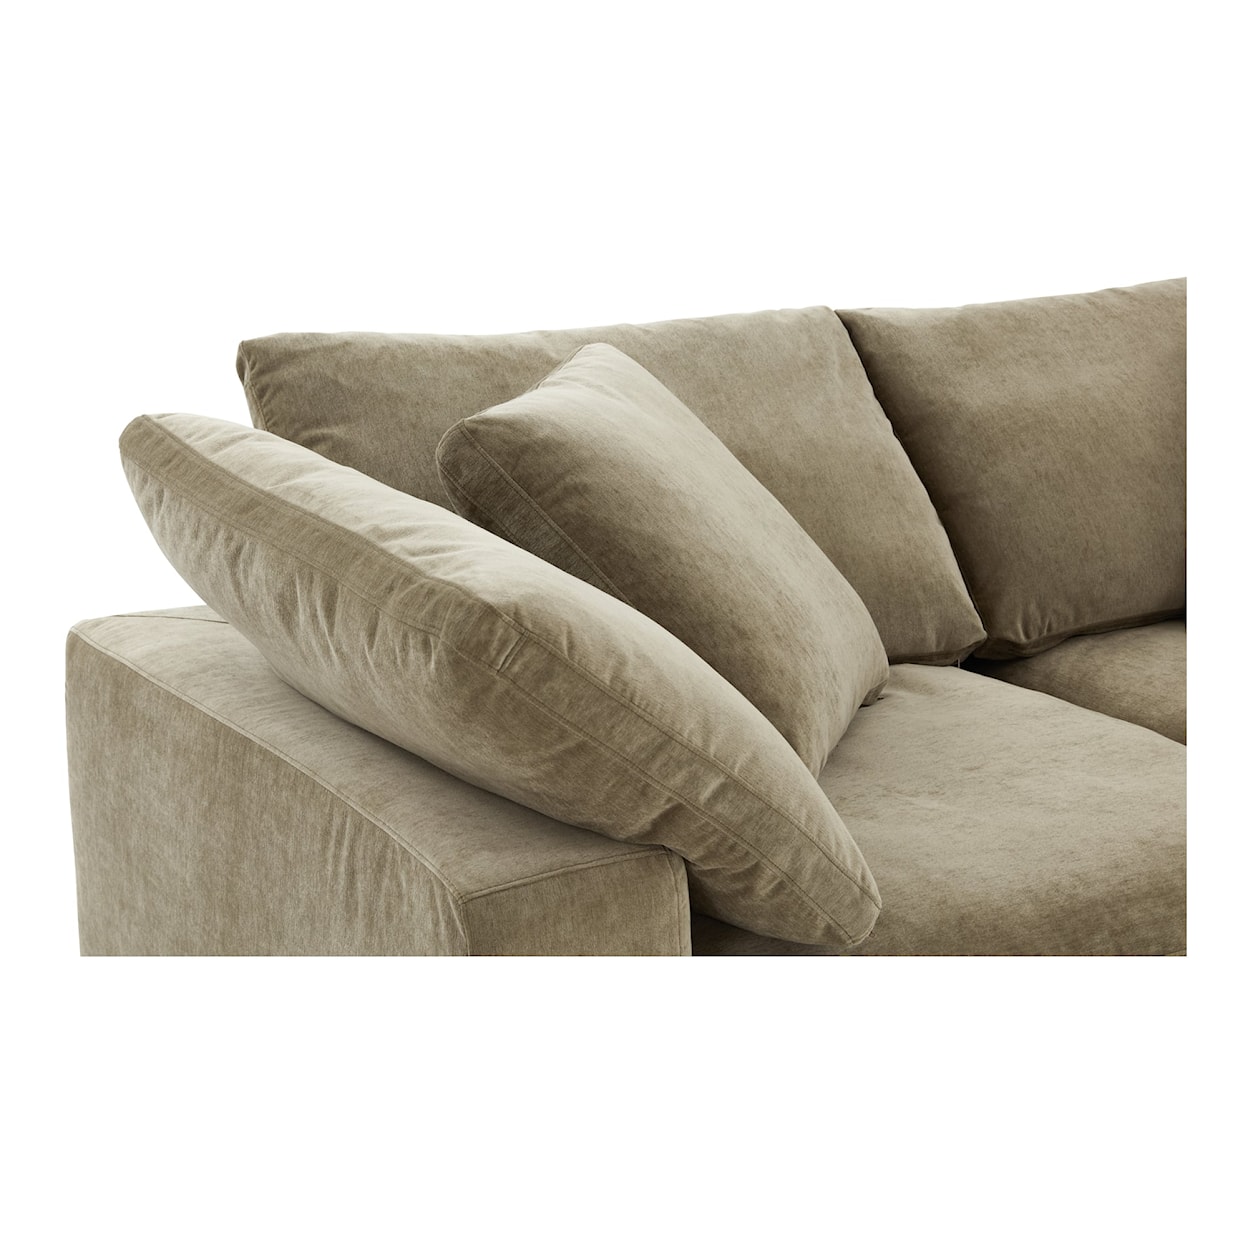 Moe's Home Collection Terra 3-pc. Sectional Sofa